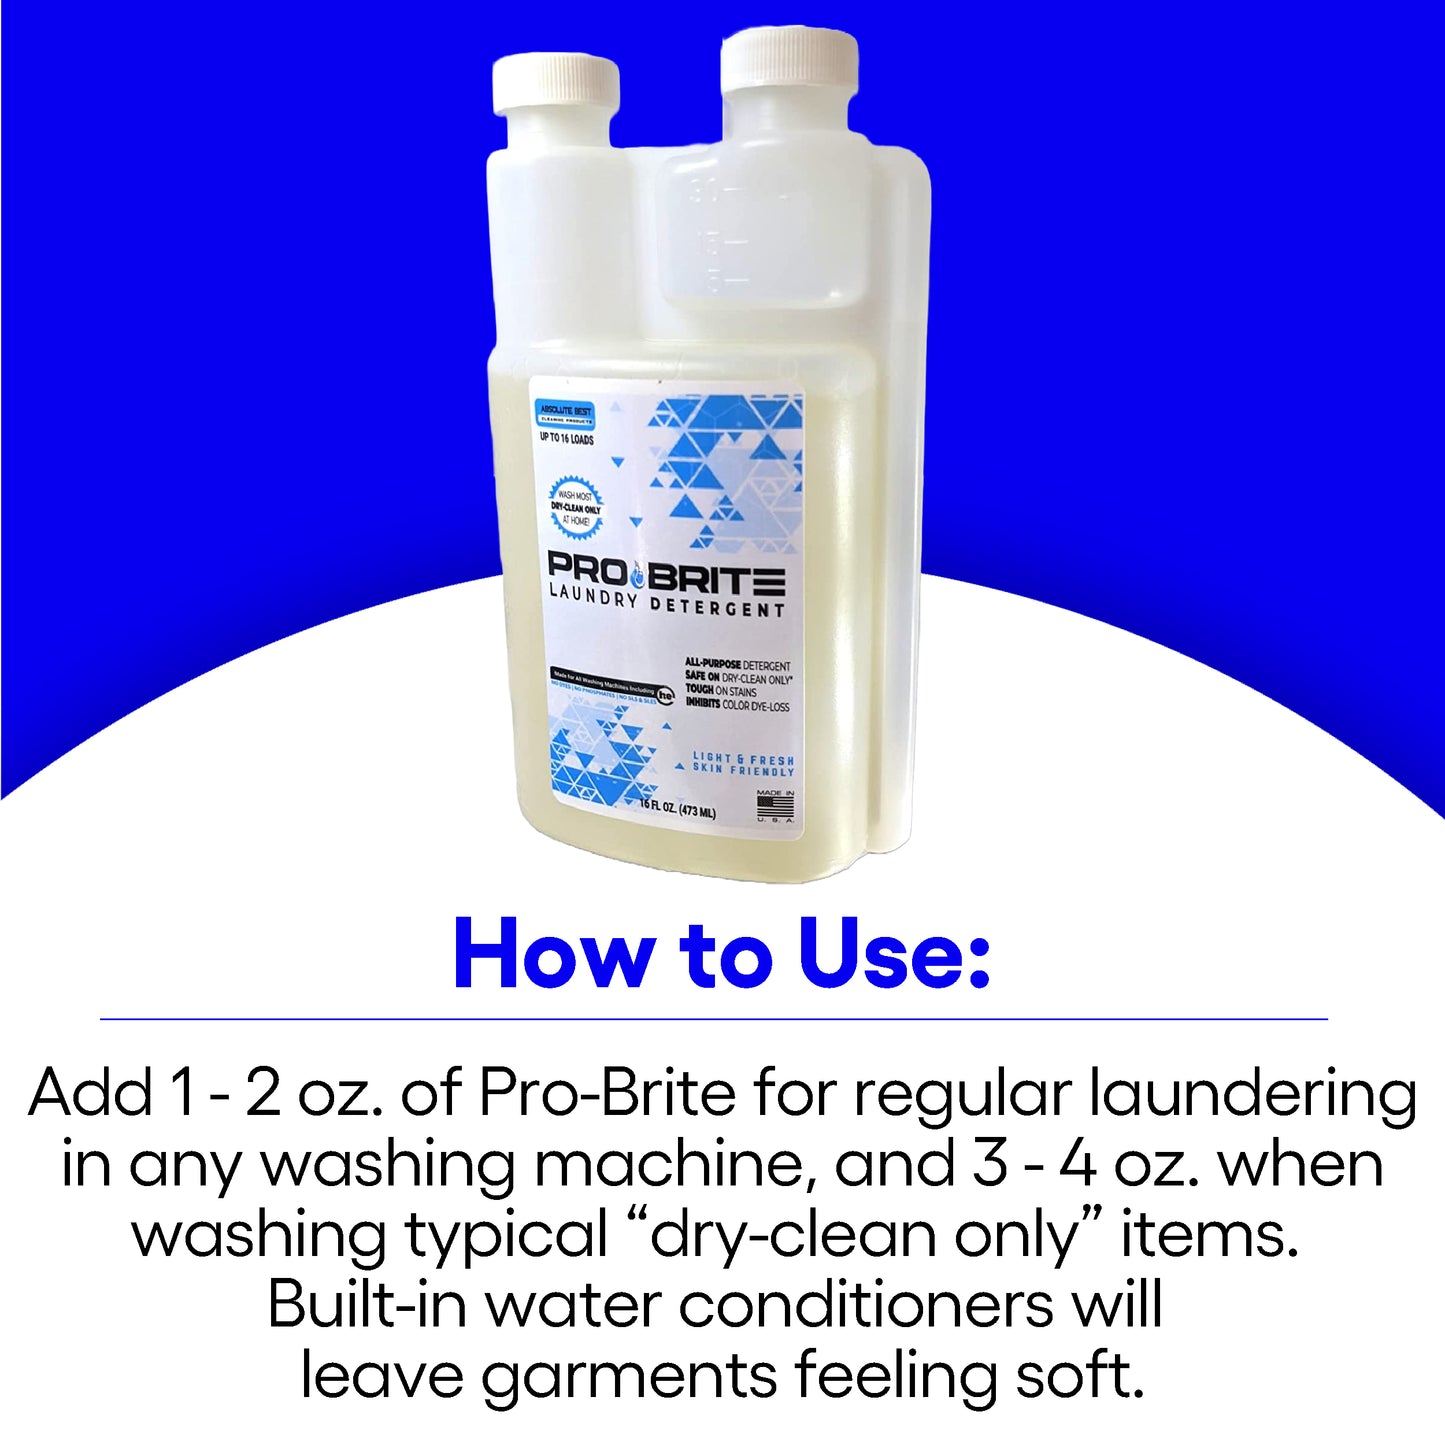 Pro-Brite Specialty Detergent for Dry-Clean Only Fabrics - Now Wash Right at Home